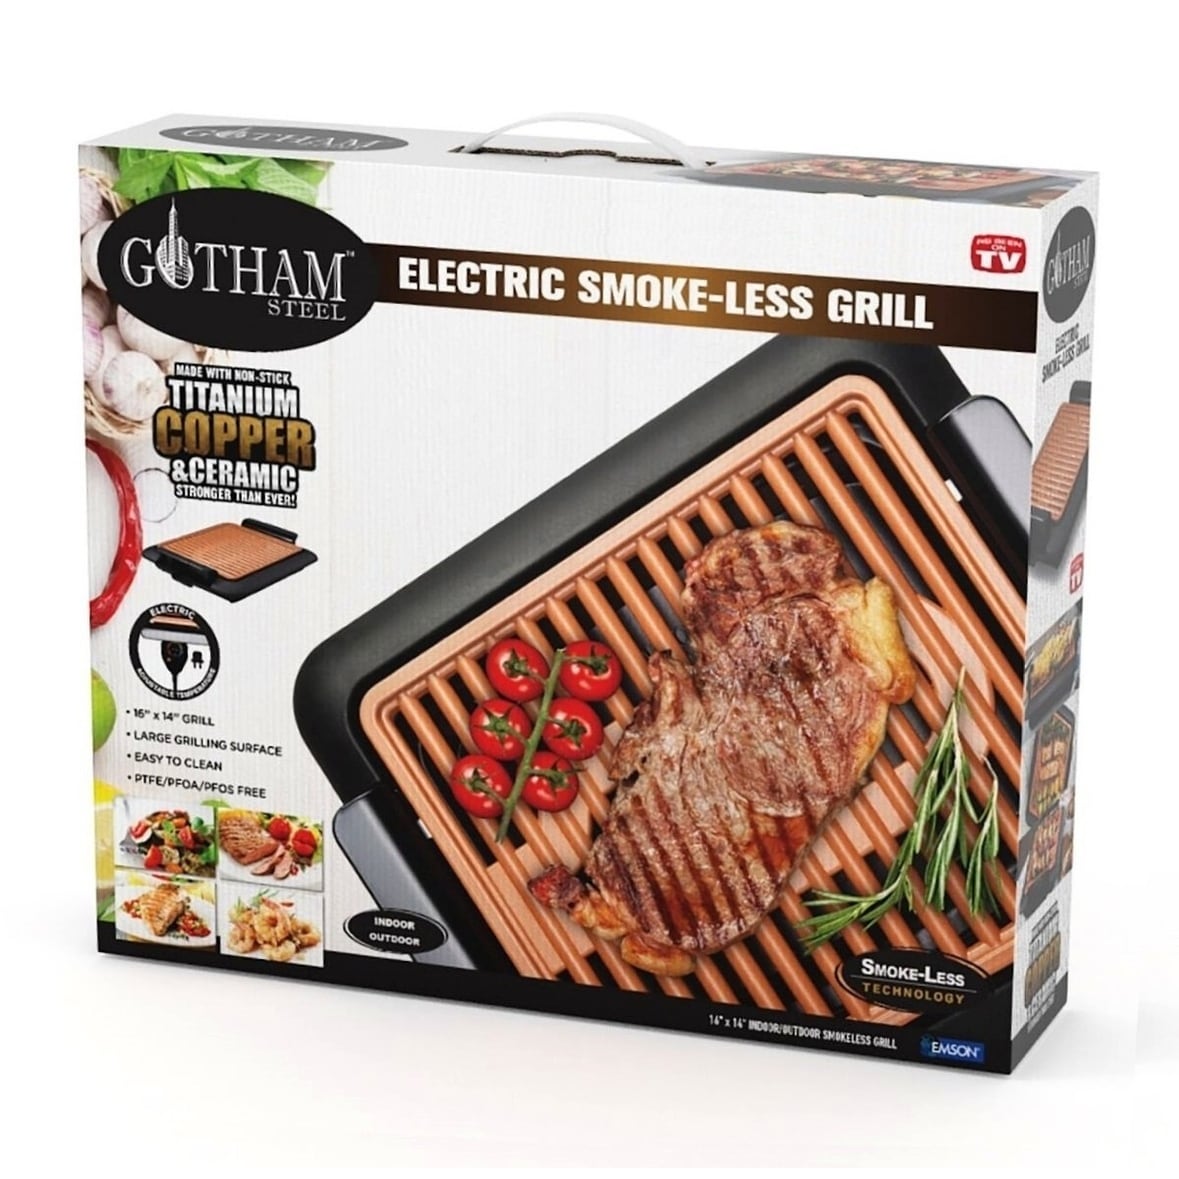 https://ak1.ostkcdn.com/images/products/17653184/Gotham-Steel-Copper-Non-stick-Indoor-Electric-Smokeless-Grill-3dd7e8b6-7c9c-46aa-a497-1091879e27f1.jpg